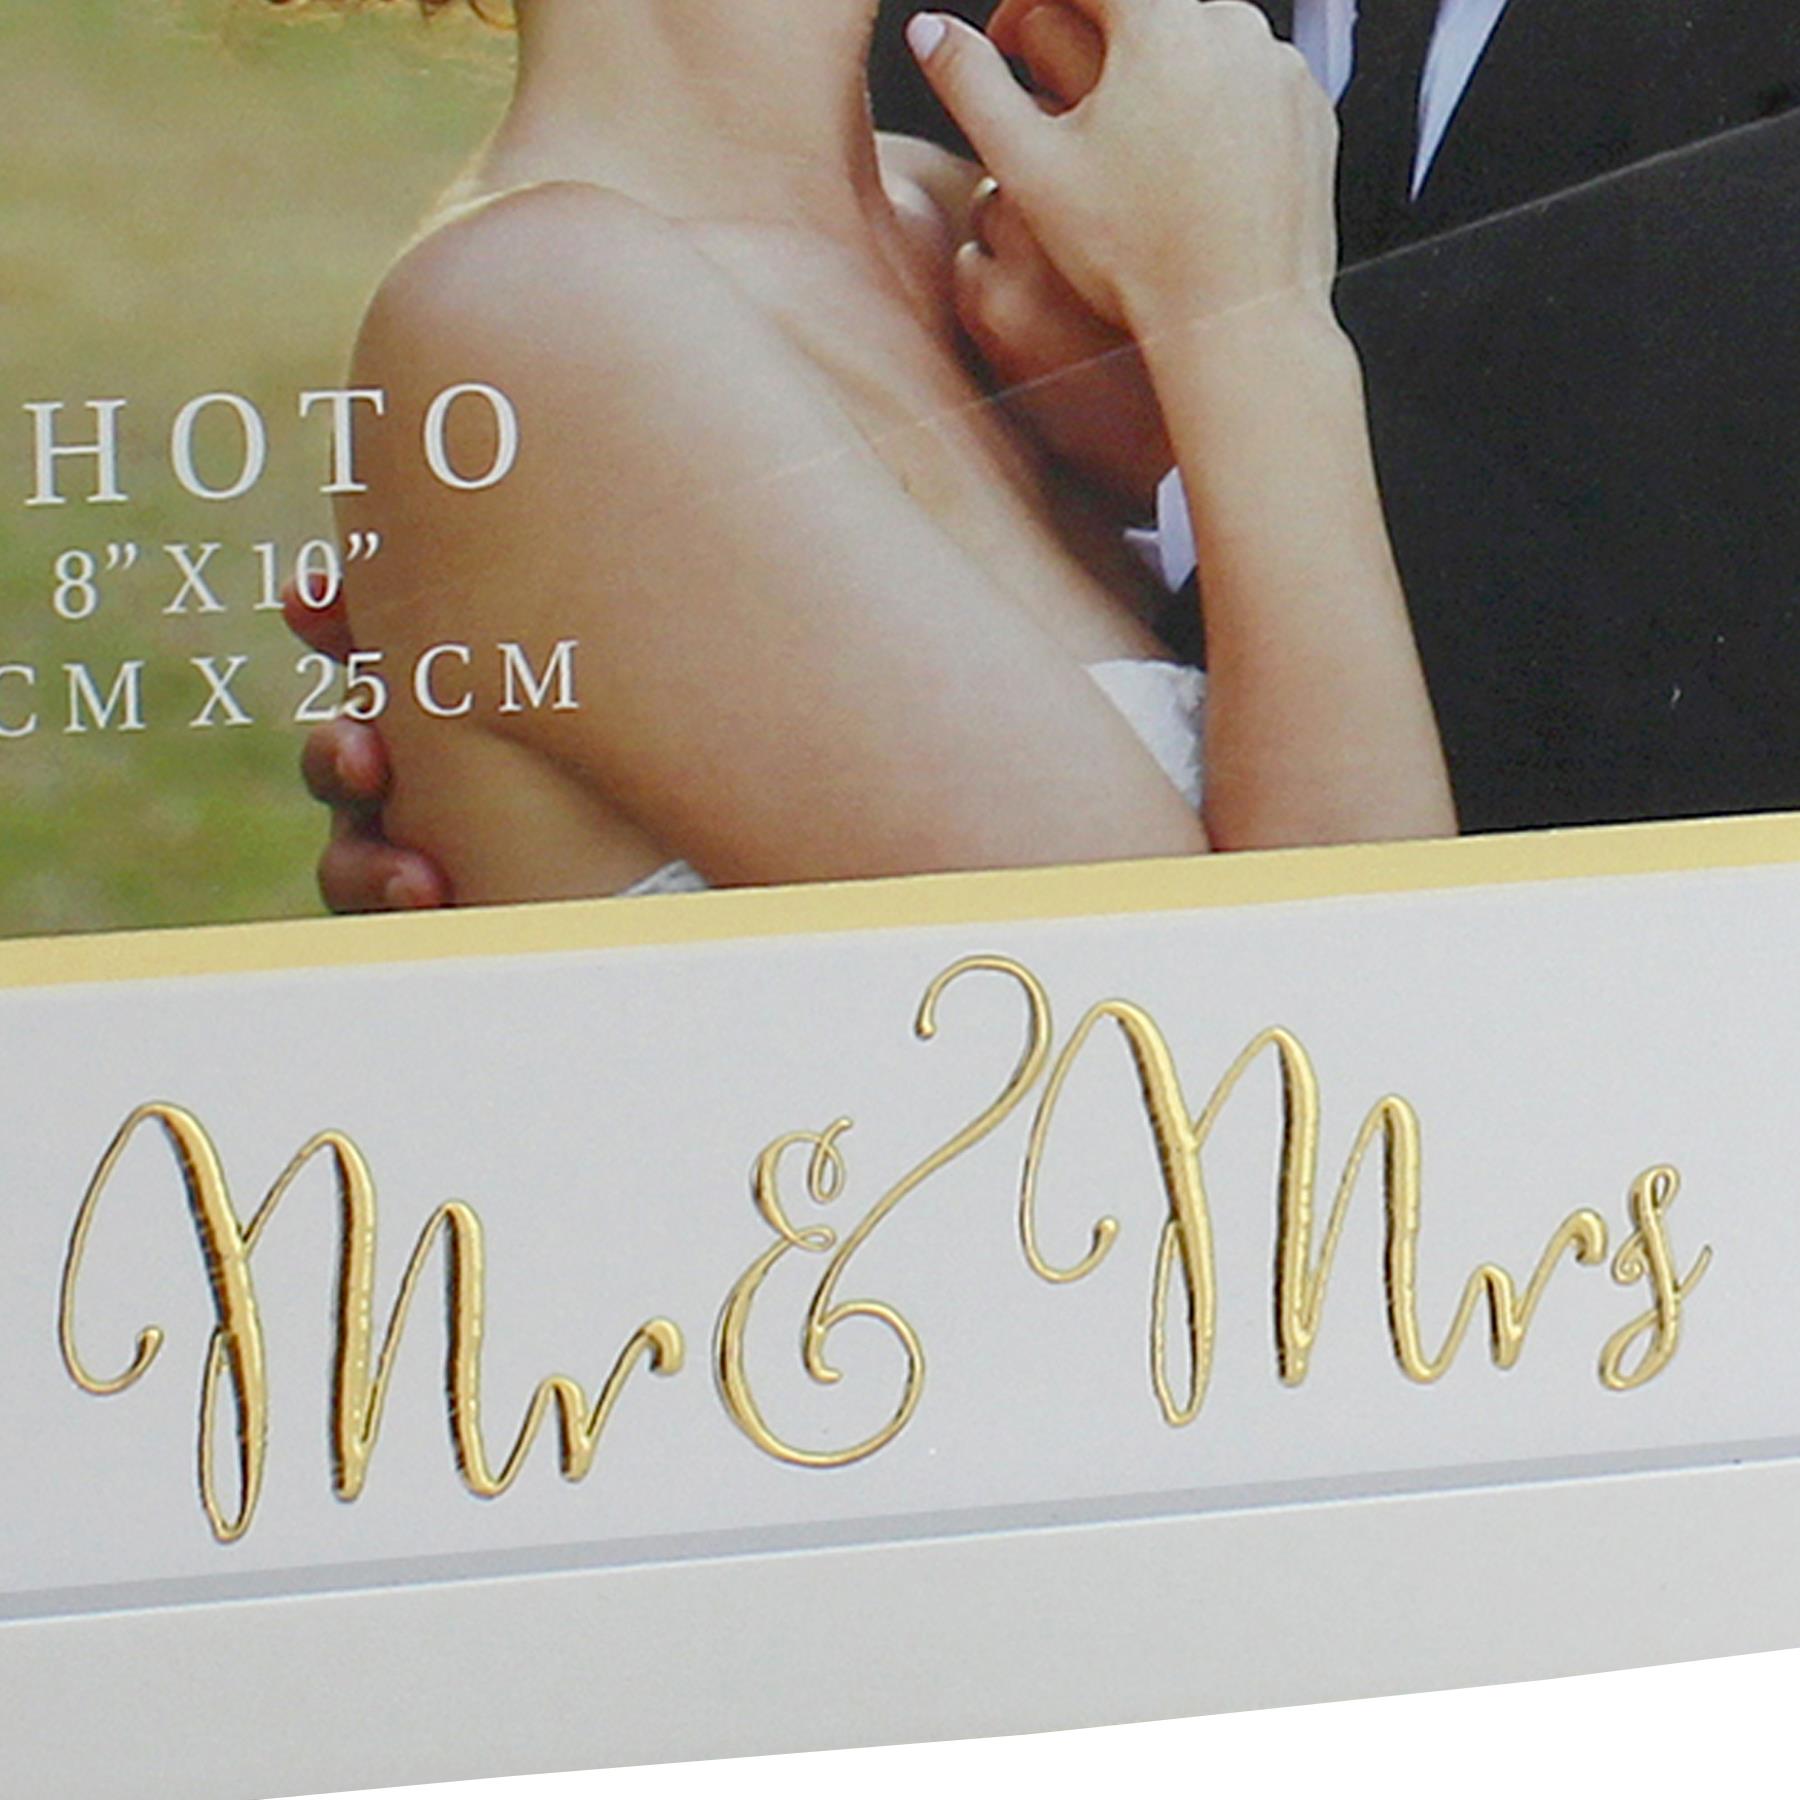 Always and Forever Range Gold Foil 'Mr and Mrs' - 8x10 Photo Frame